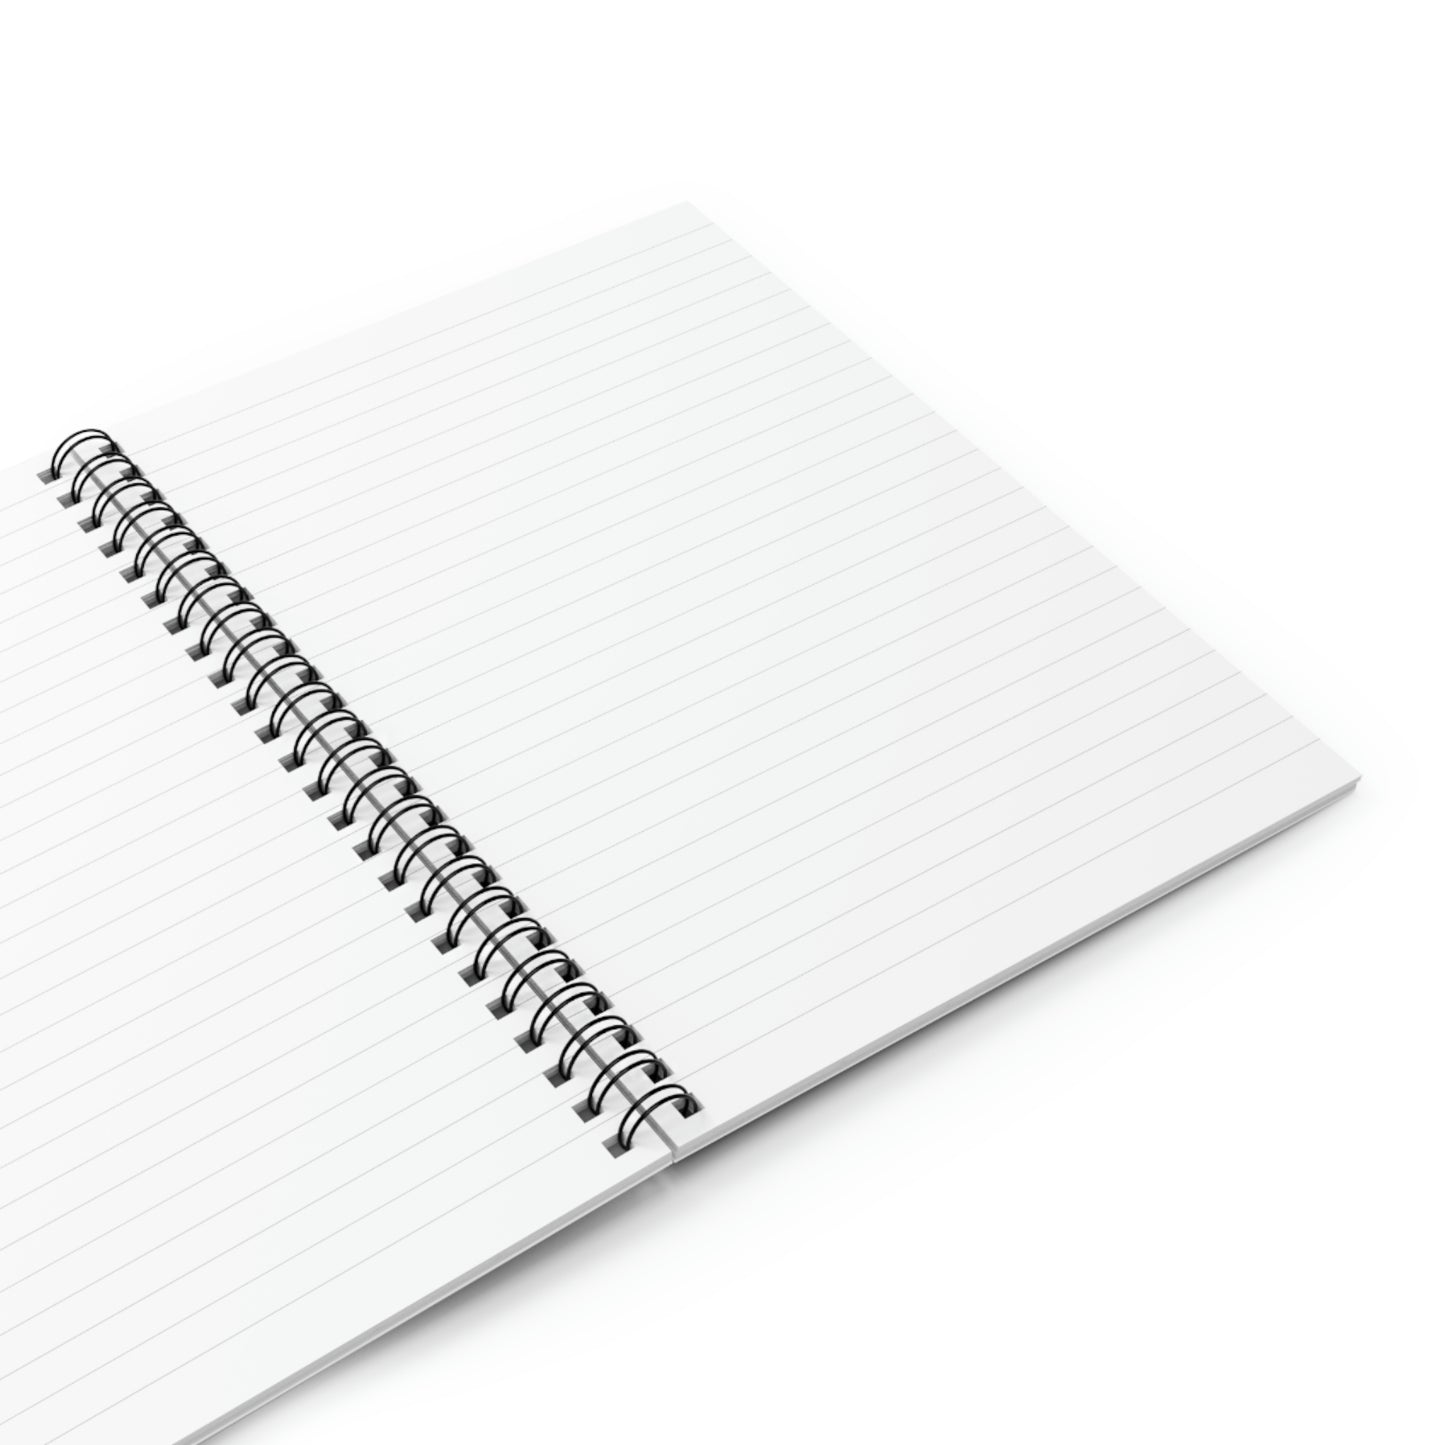 Strike The Right Chord - Spiral Notebook